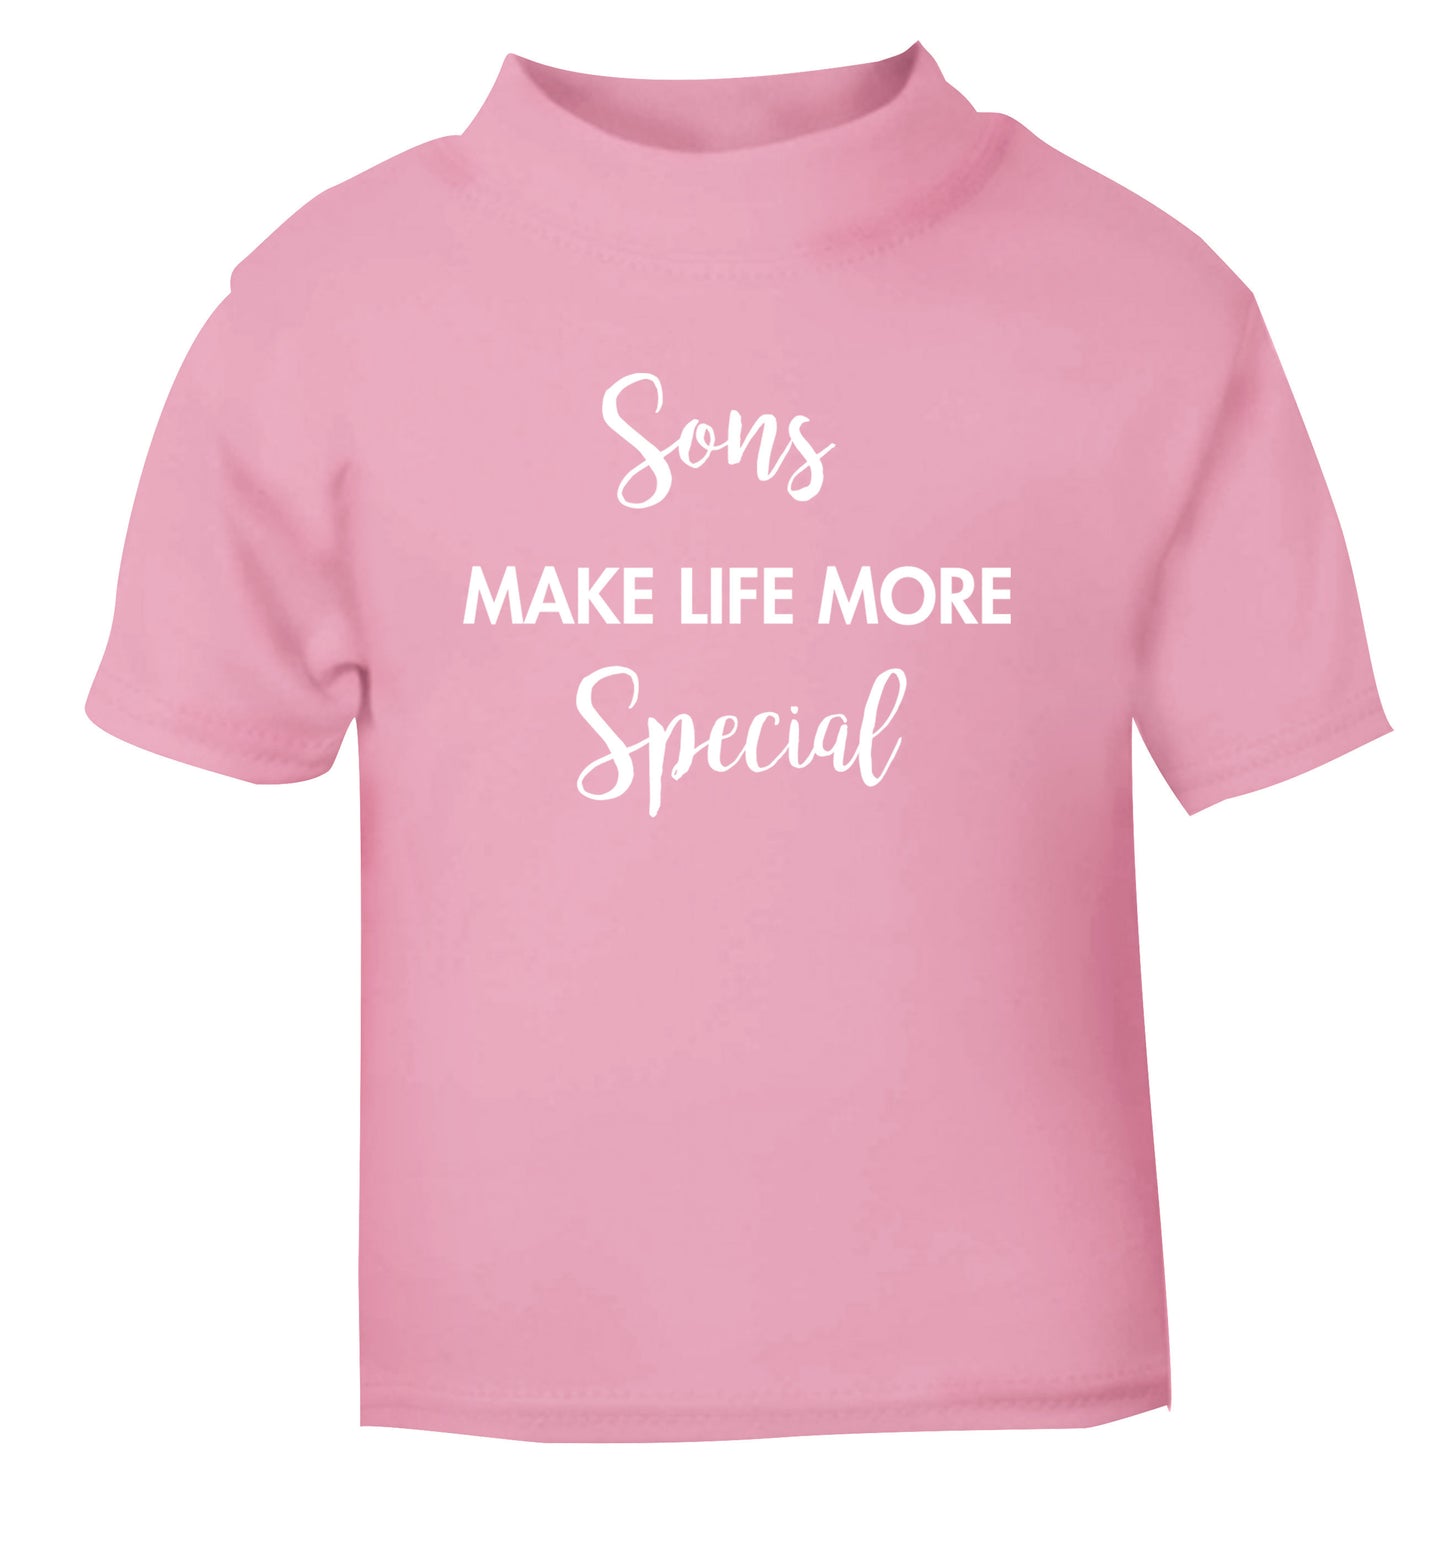 Sons make life more special light pink Baby Toddler Tshirt 2 Years